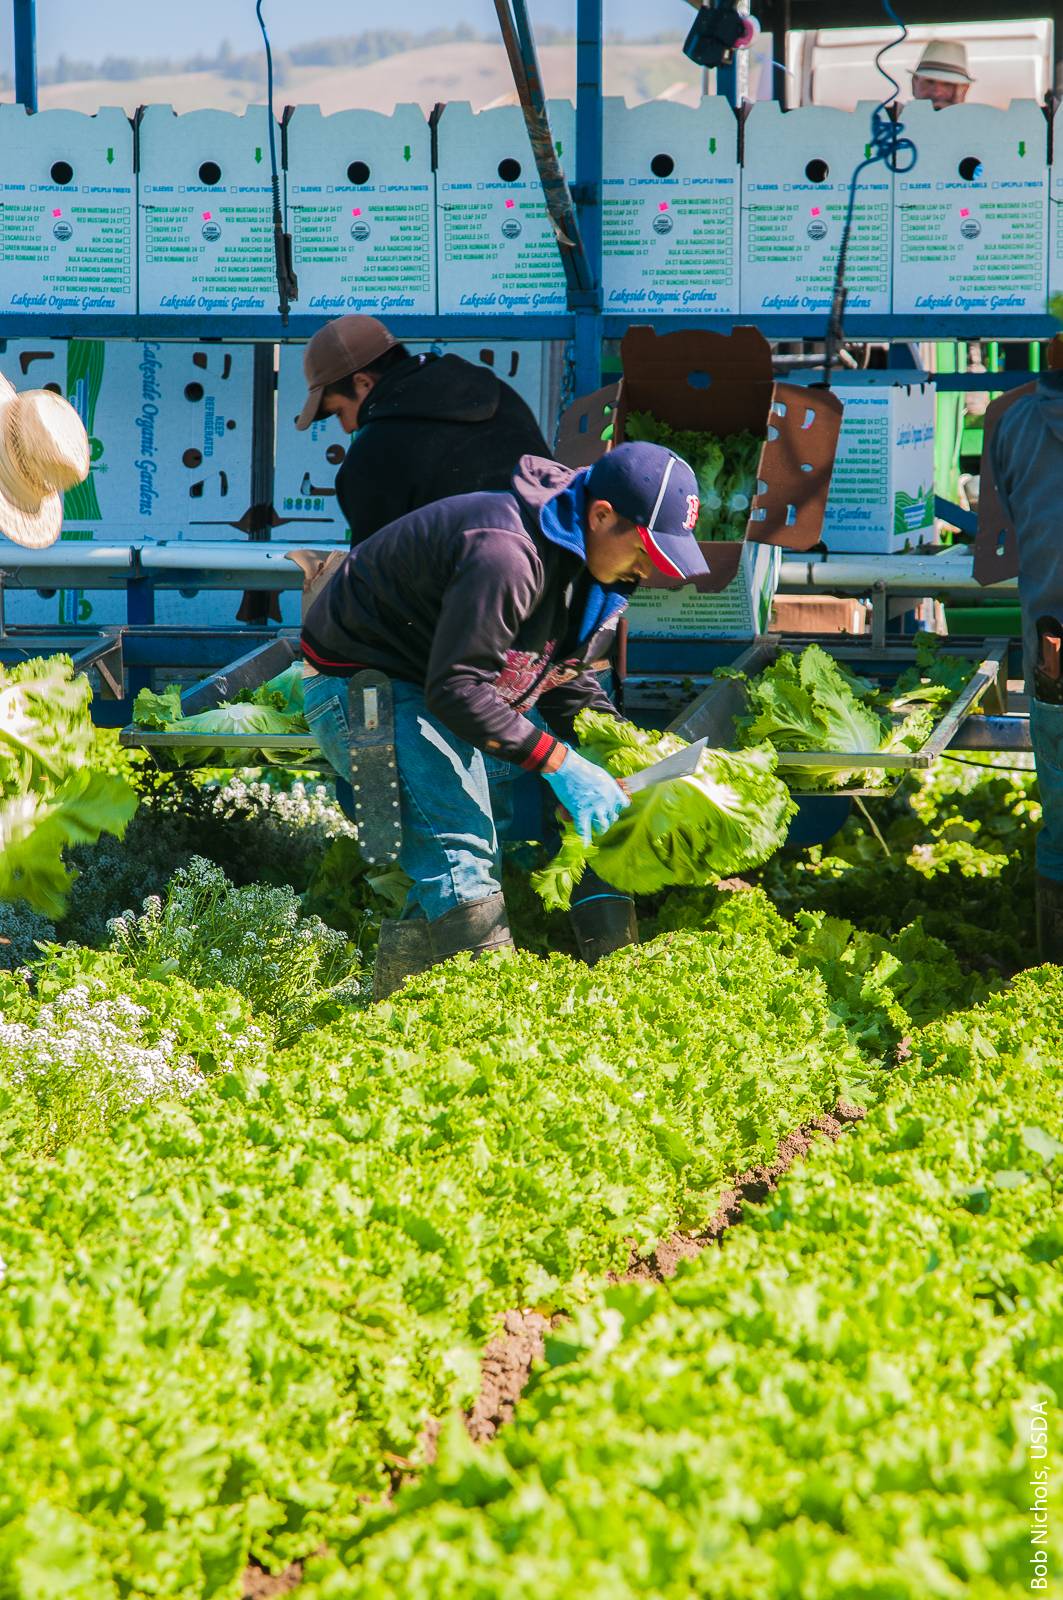 Rising minimum wages in many states, fewer migrant farmworkers, and advances in mechanization have encouraged many farmers to invest in machines, which are doing more planting and pruning and are improving rapidly to harvest leaf lettuces (shown here being harvested in Santa Cruz County), blueberries and peaches.